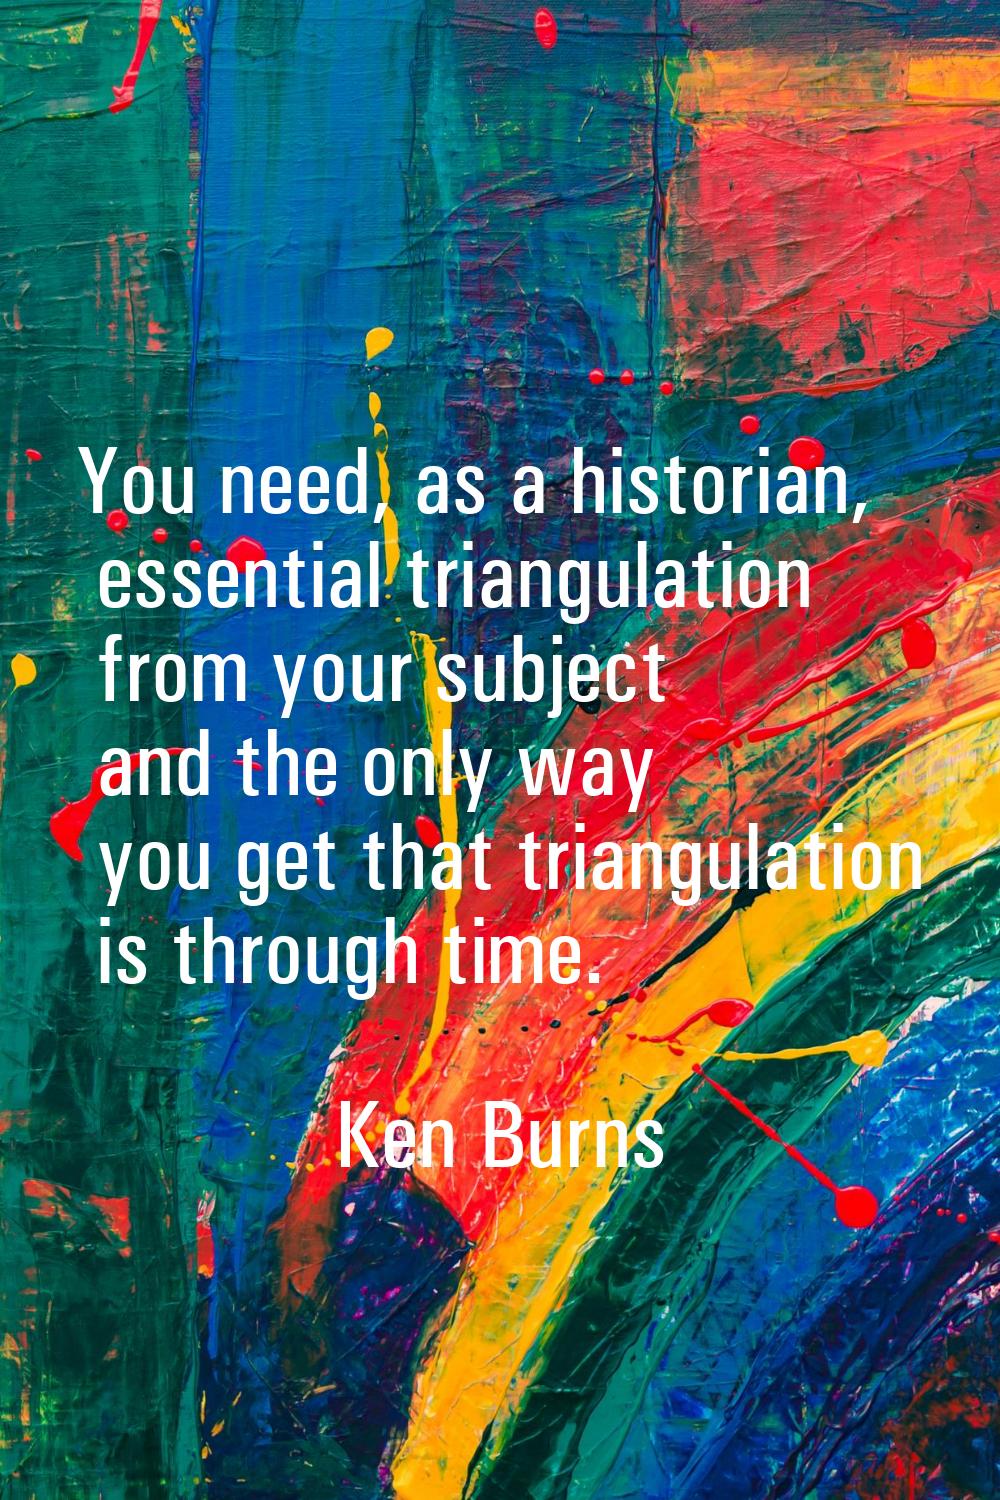 You need, as a historian, essential triangulation from your subject and the only way you get that t